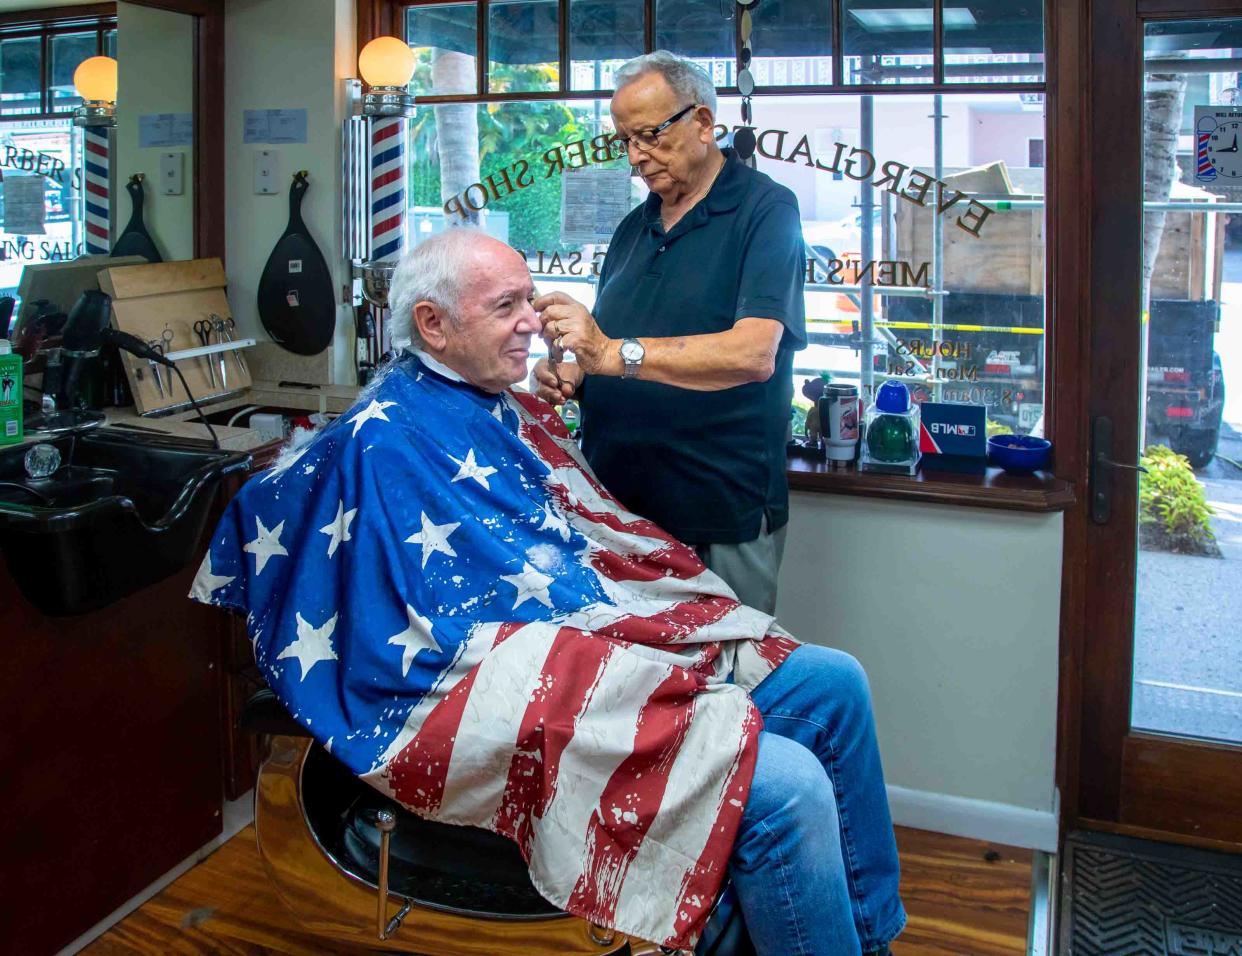 Leo Martino, 90, gives his client Leslie Evans a haircut on Aug. 29, his last day of work at the Everglades Barber Shop in Palm Beach.